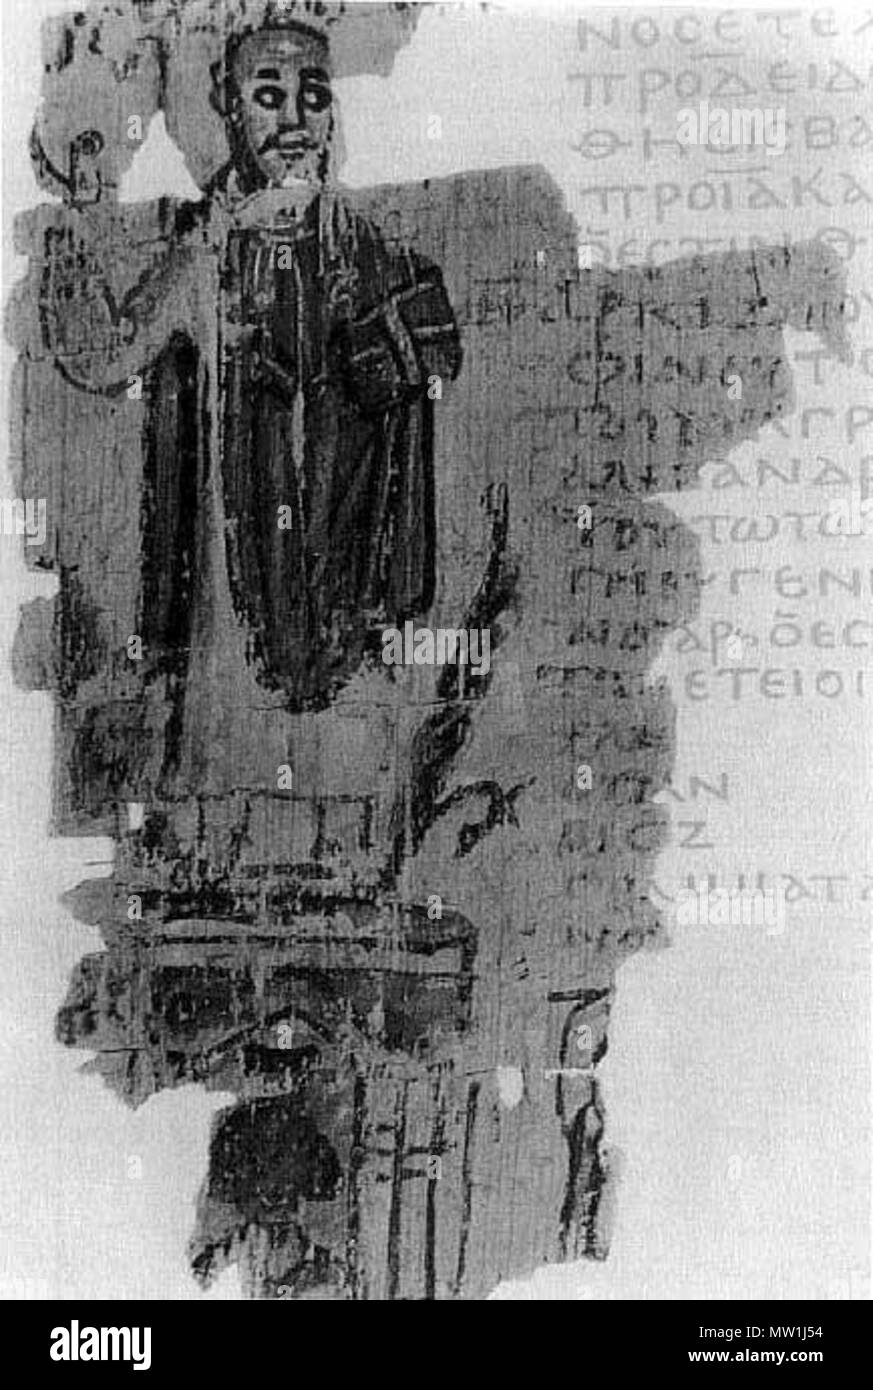 . Theophilus and the Serapeum. Bishop Theophilus of Alexandria, en:Gospel book in hand, stands triumphantly atop the en:Serapeum in en:391. The cult image of en:Serapis, crowned with the en:modius, is visible within the temple at the bottom. Marginal illustration from a chronicle written in Alexandria in the early fifth century, thus providing a nearly contemporary portrait of Theophilus. P. Goleniscev 6 verso. (From A. Bauer and J. Strygowski, 'Eine alexandrinische Weltchronik,' Denkschriften der Kaiserlichen Akademie der Wissenschaften: Wien 51.2 [en:1906]: 1-204, fig. 6 verso) . The origina Stock Photo